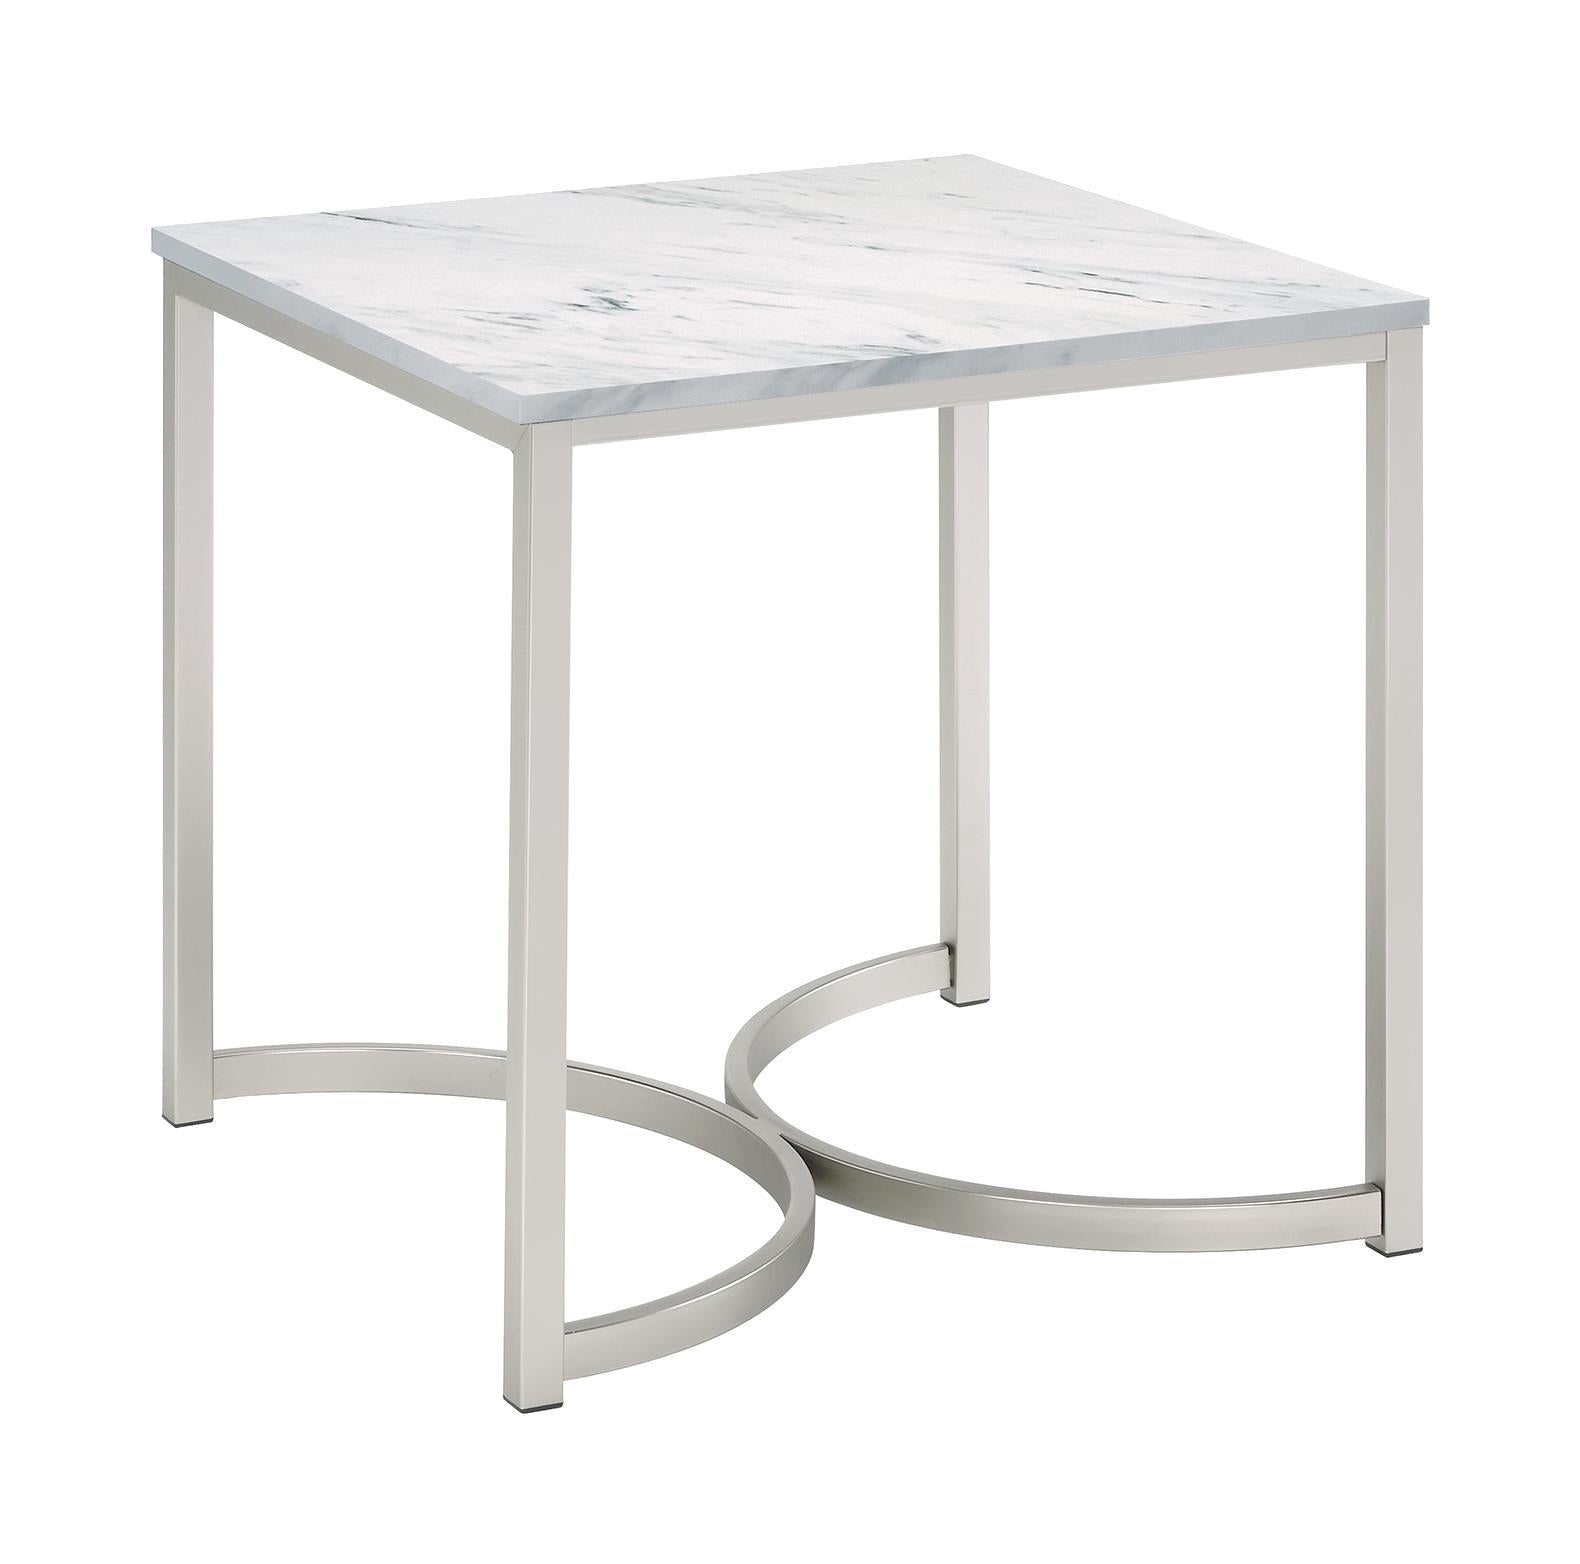 Leona Faux Marble Square End Table White and Satin Nickel - Luxury Home Furniture (MI)